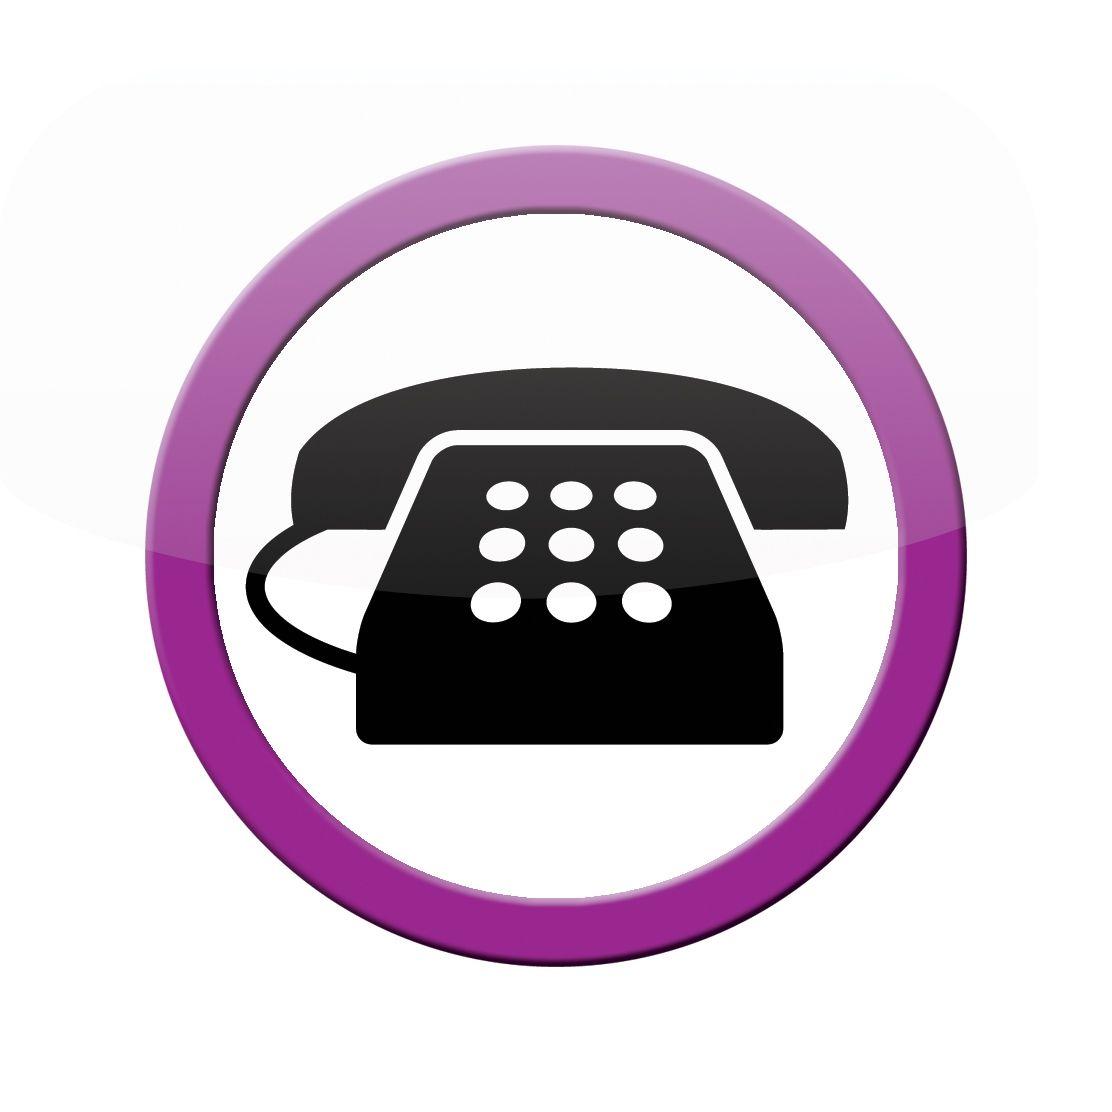 Landline Logo - How to set up and get the best deals on telephones, mobiles and ...